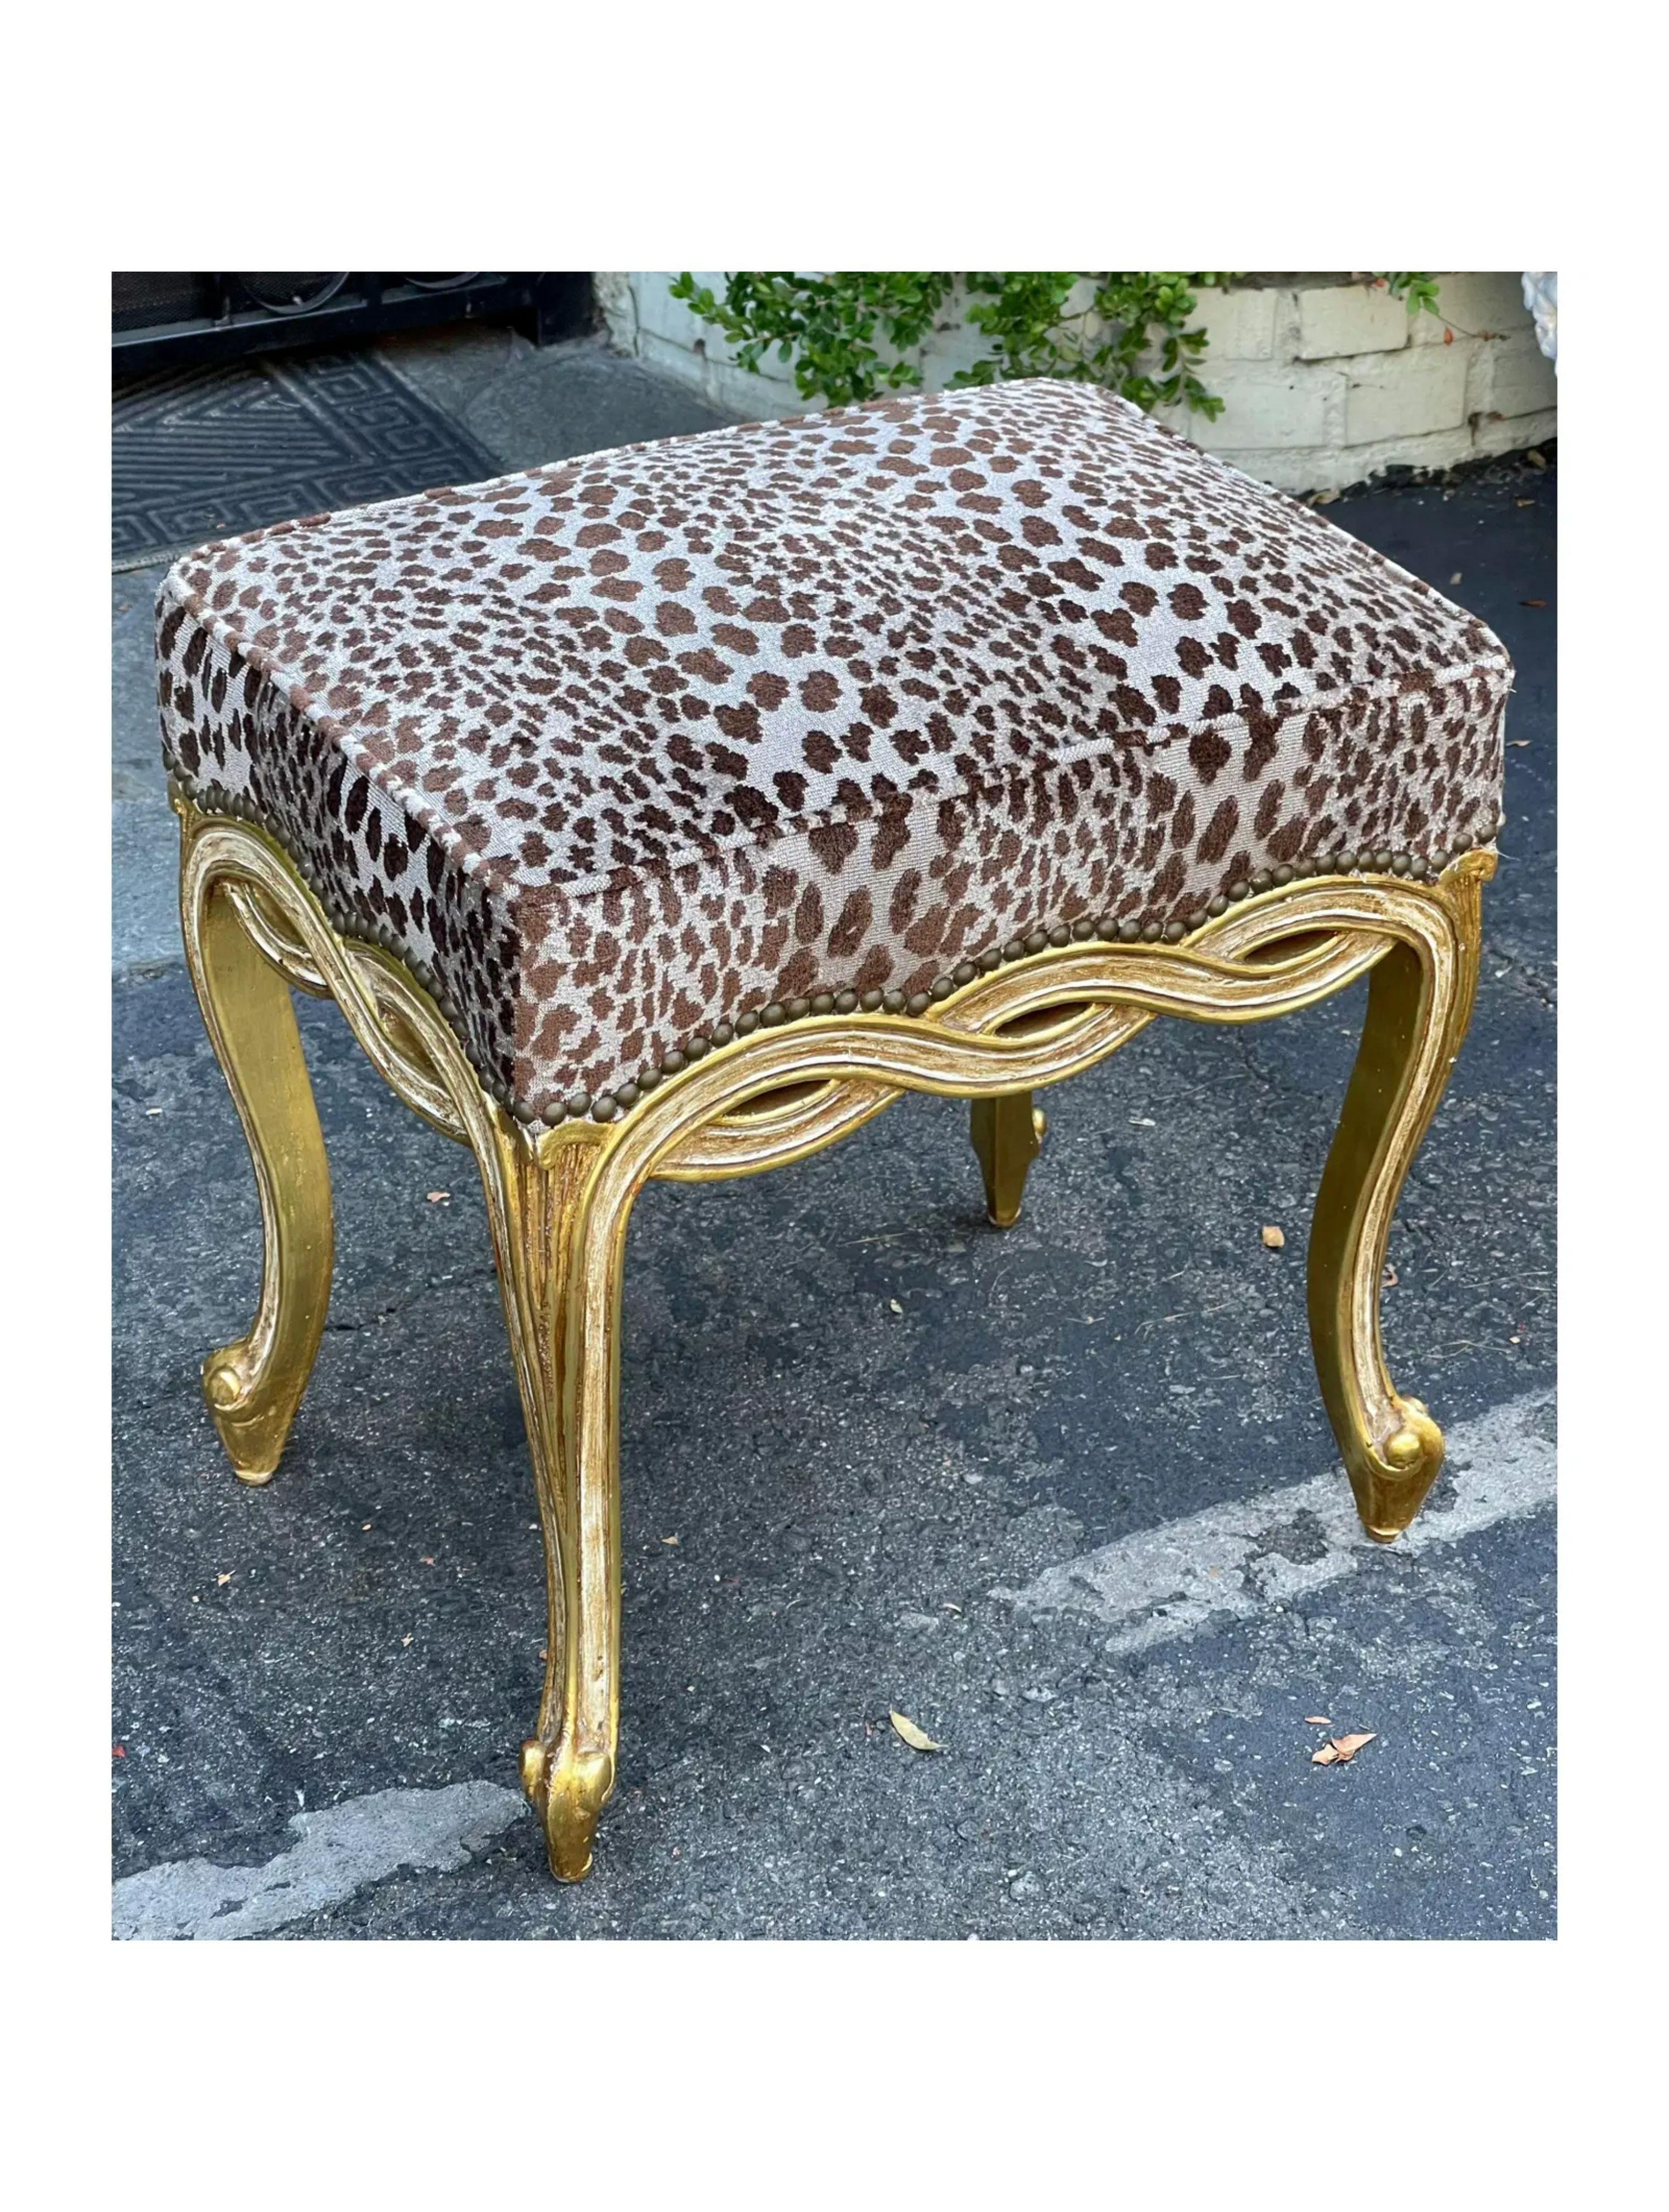 Regency Style Designer Taboret Bench with Cheetah Velvet by Randy Esada In Good Condition For Sale In LOS ANGELES, CA